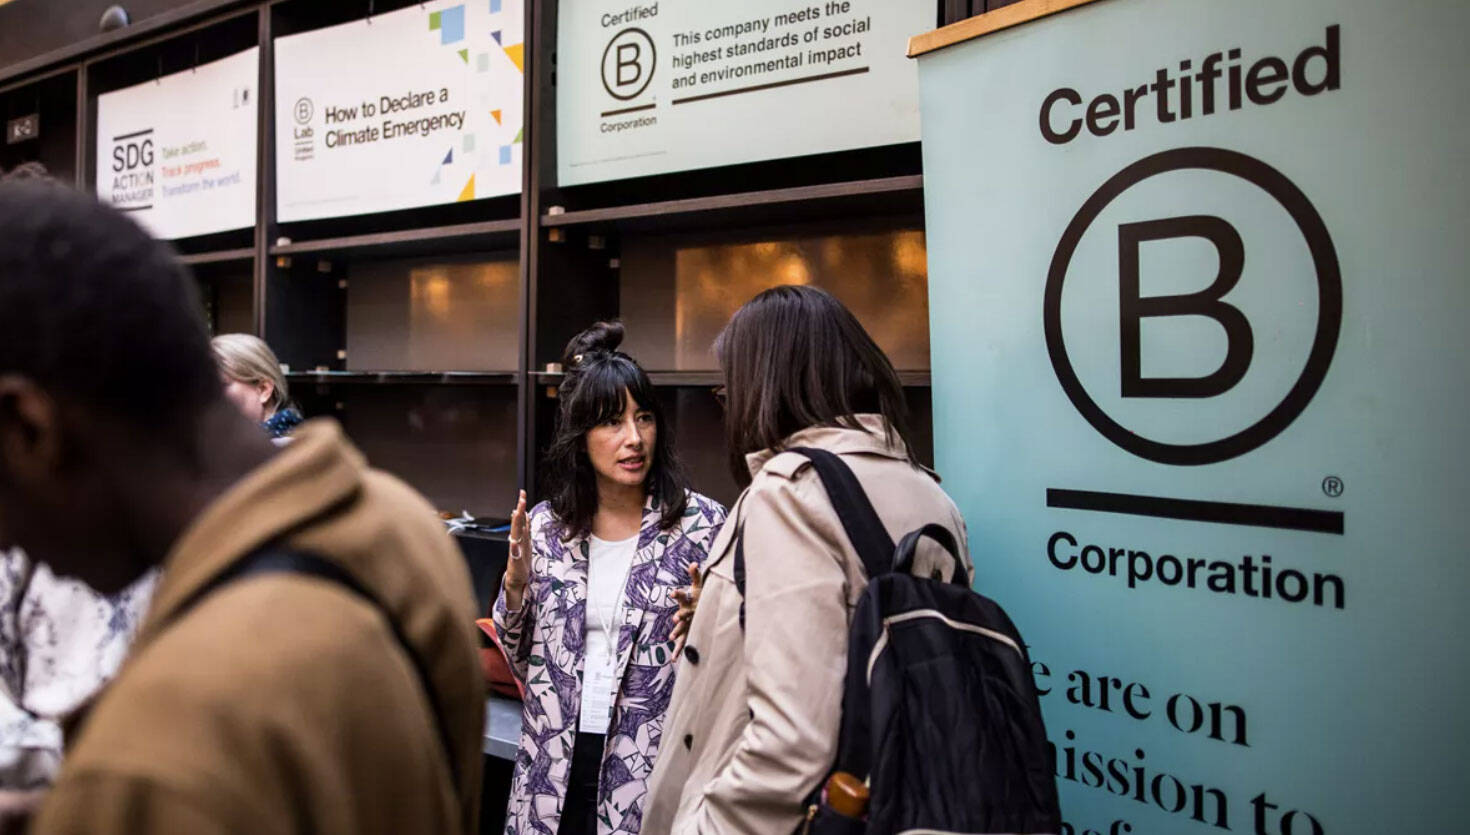 B Corp Month has shown us the power of collaboration when acting as a force for good